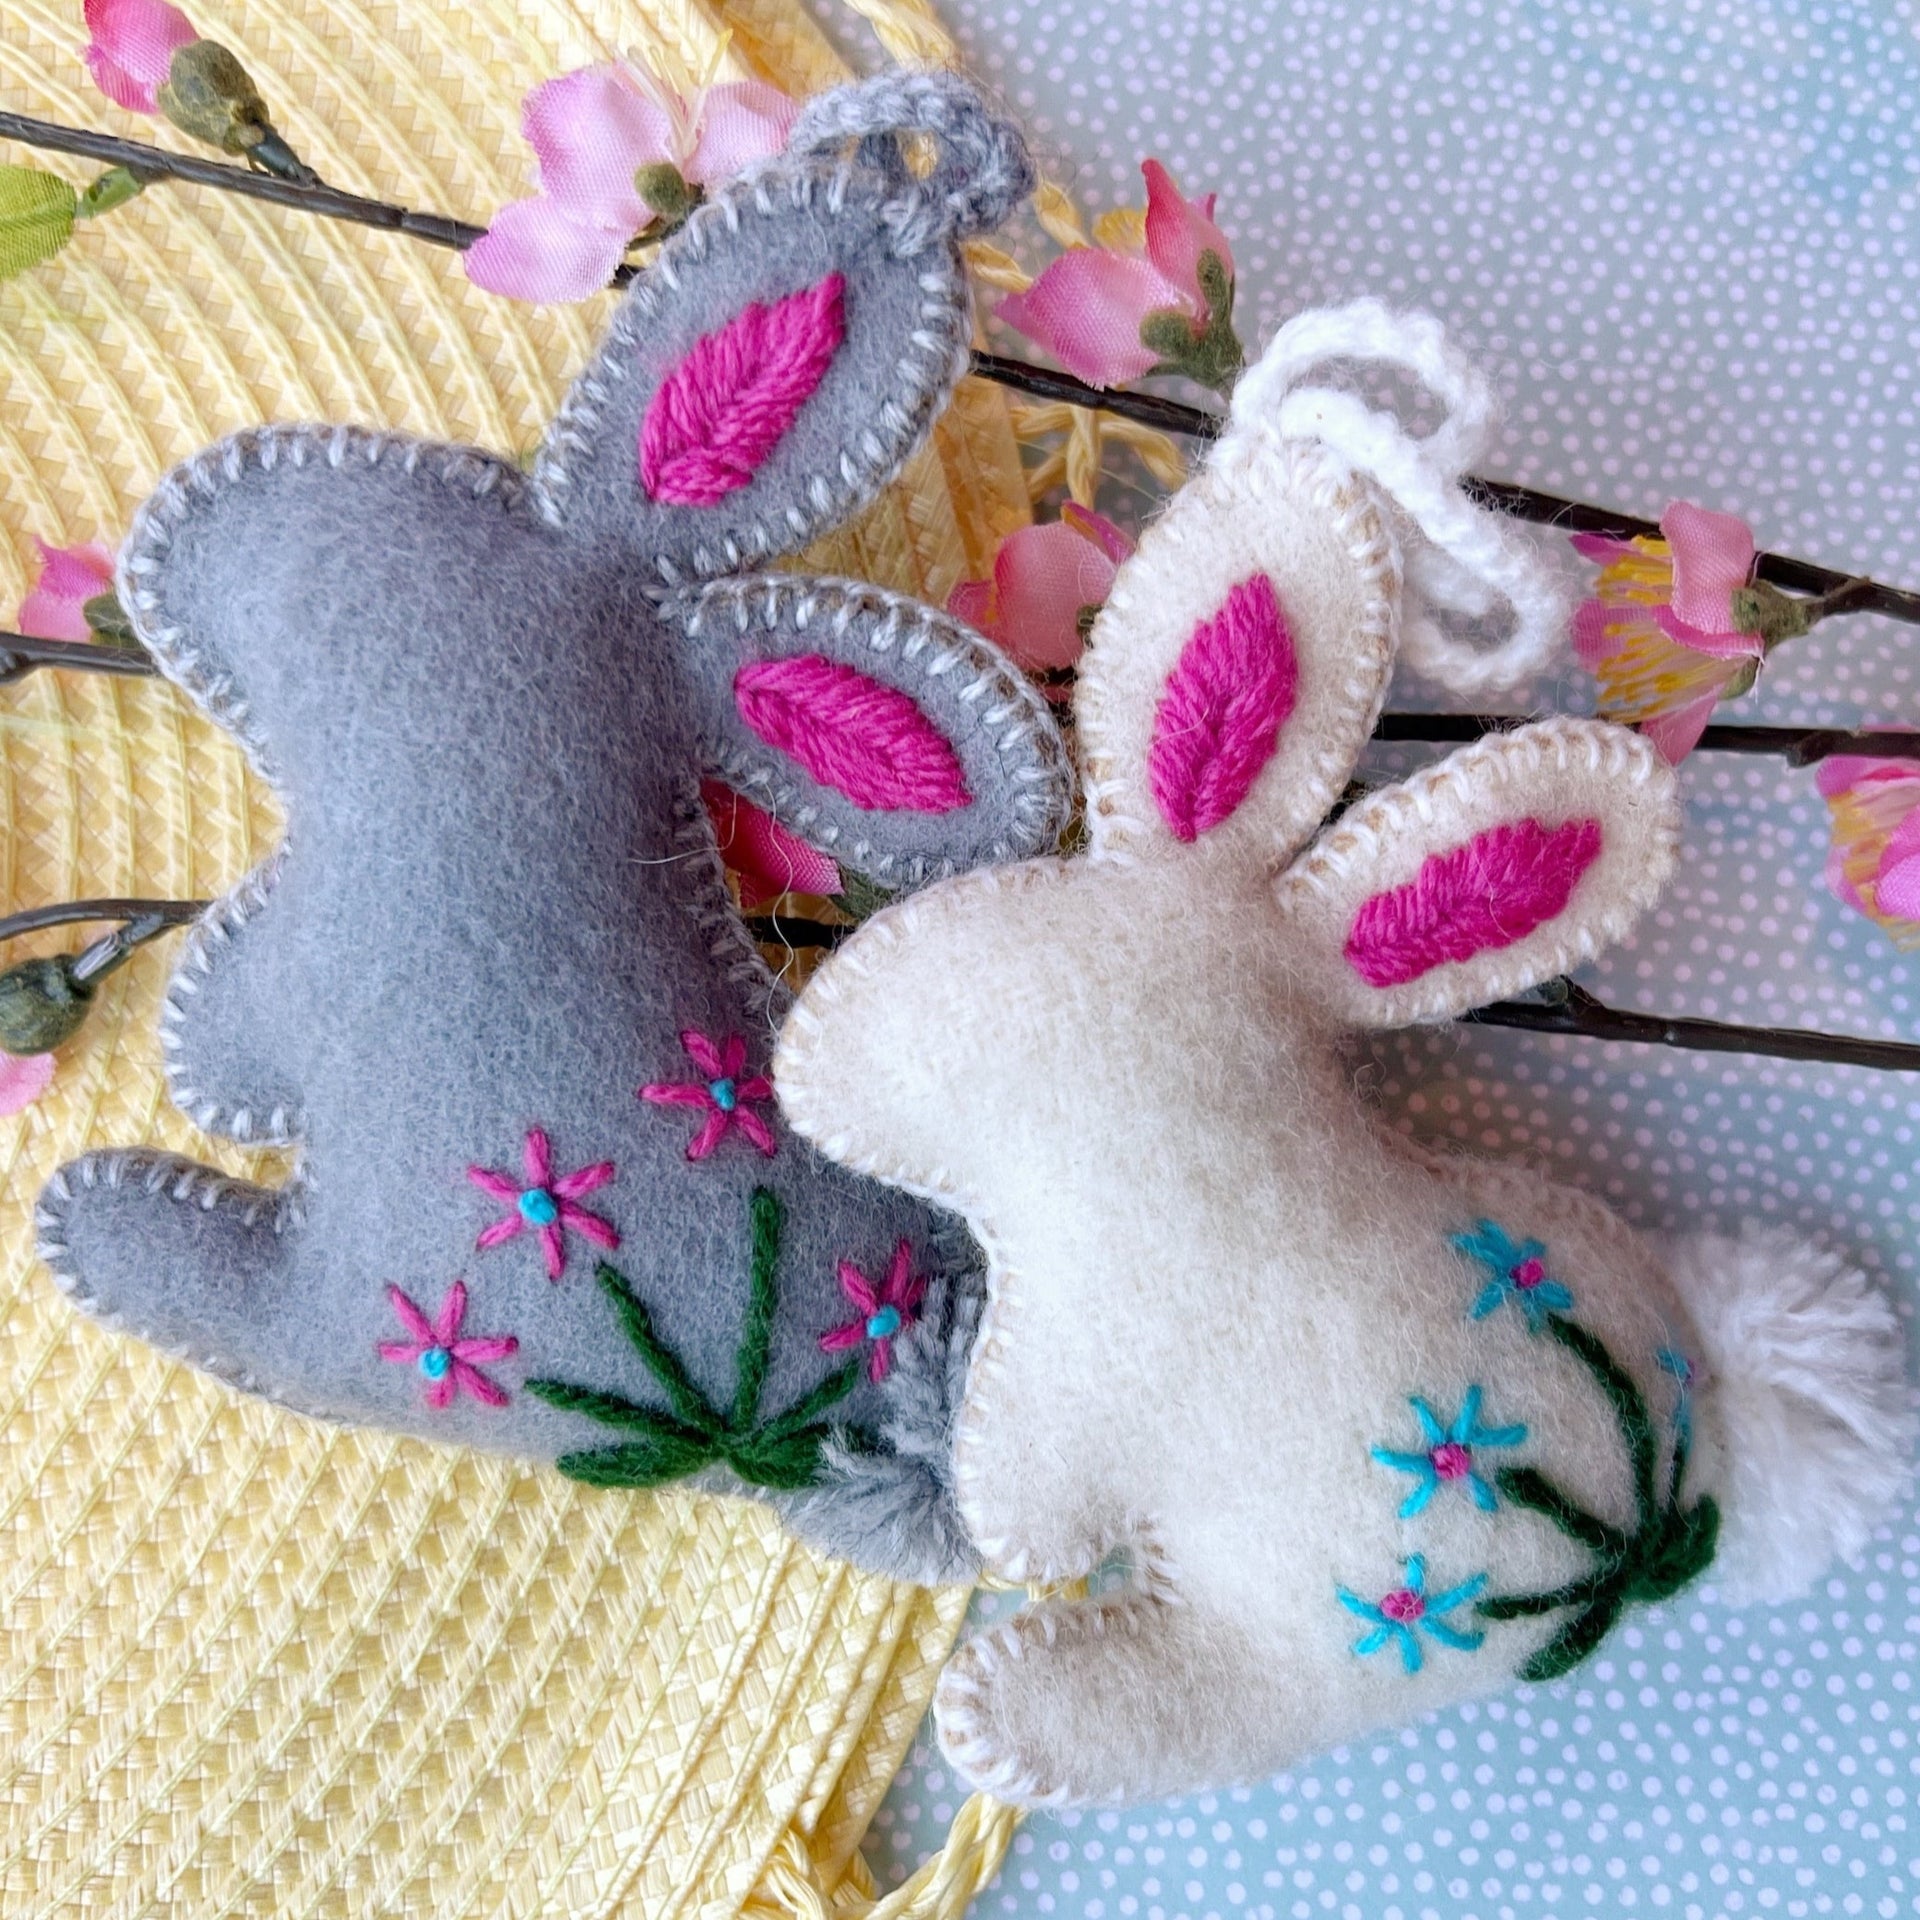 Easter Bunny Ornament Styled for Spring. Fair trade and handmade embroidery.